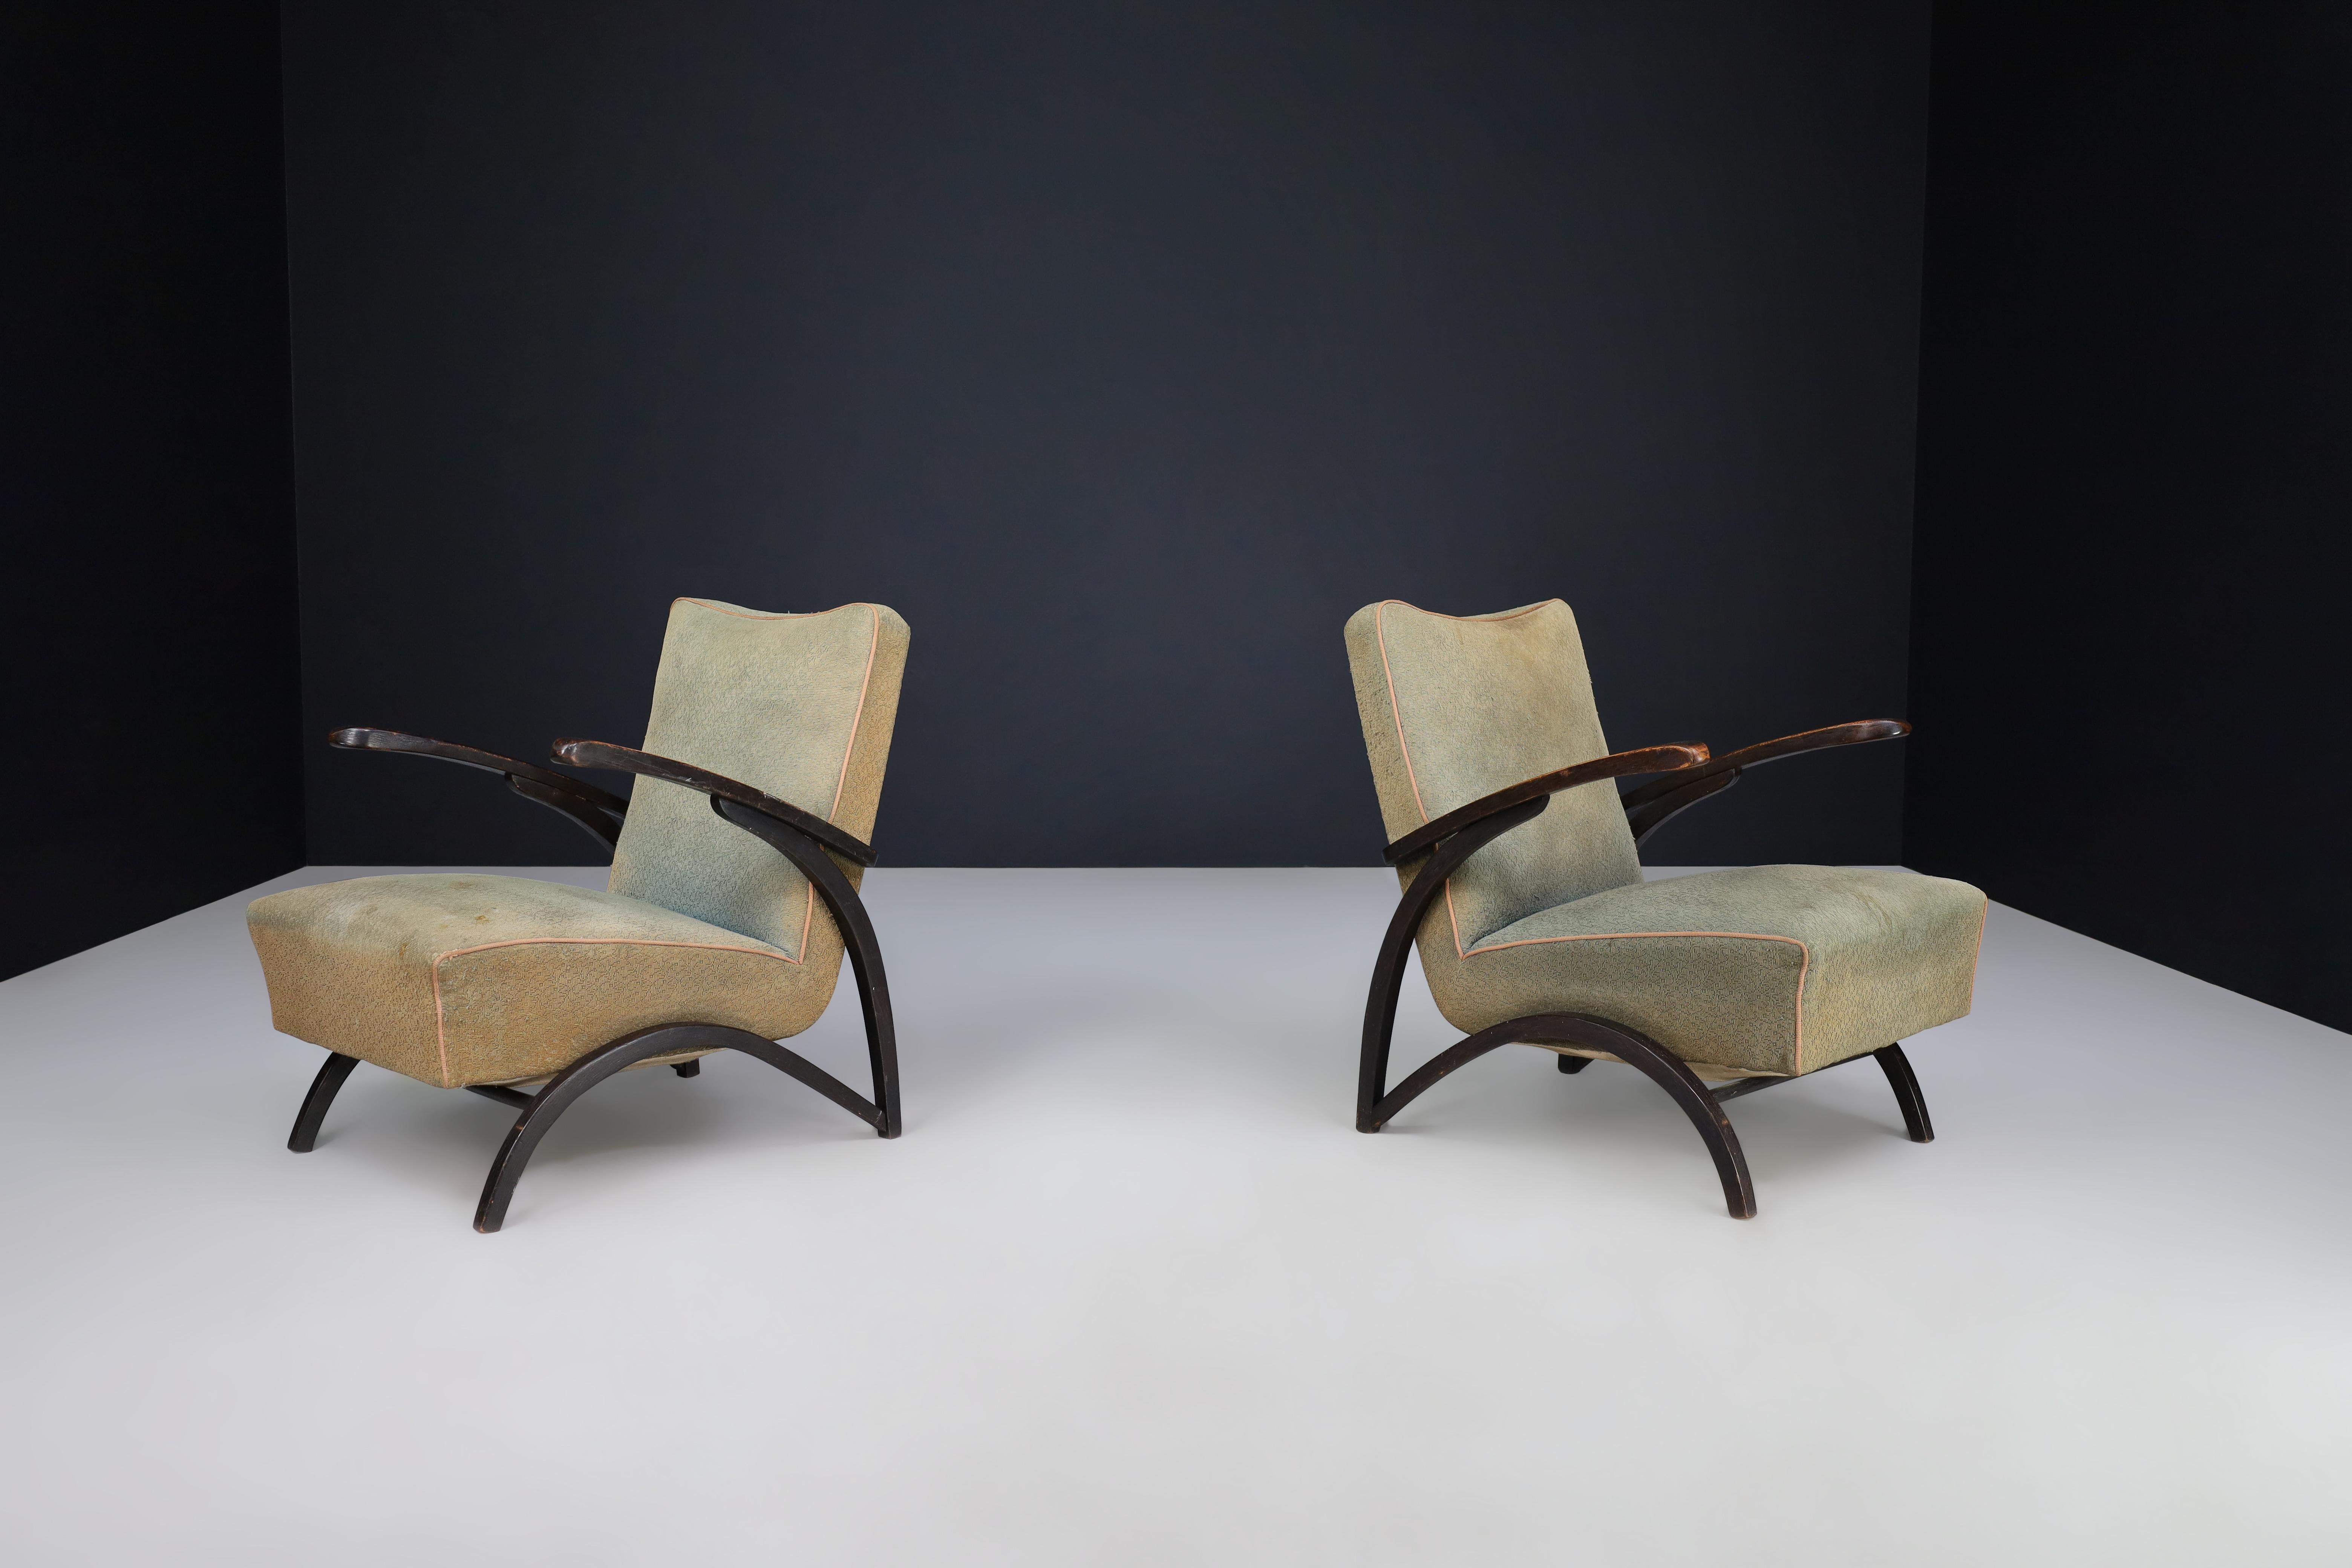 Jindrich Halabala Lounge Chairs in Original Upholstery Czech Republic 1930. 

These lounge chairs, designed by Jindrich Halabala and produced by Thonet in Czechia around 1930, are an exemplary representation of the midcentury design in Central